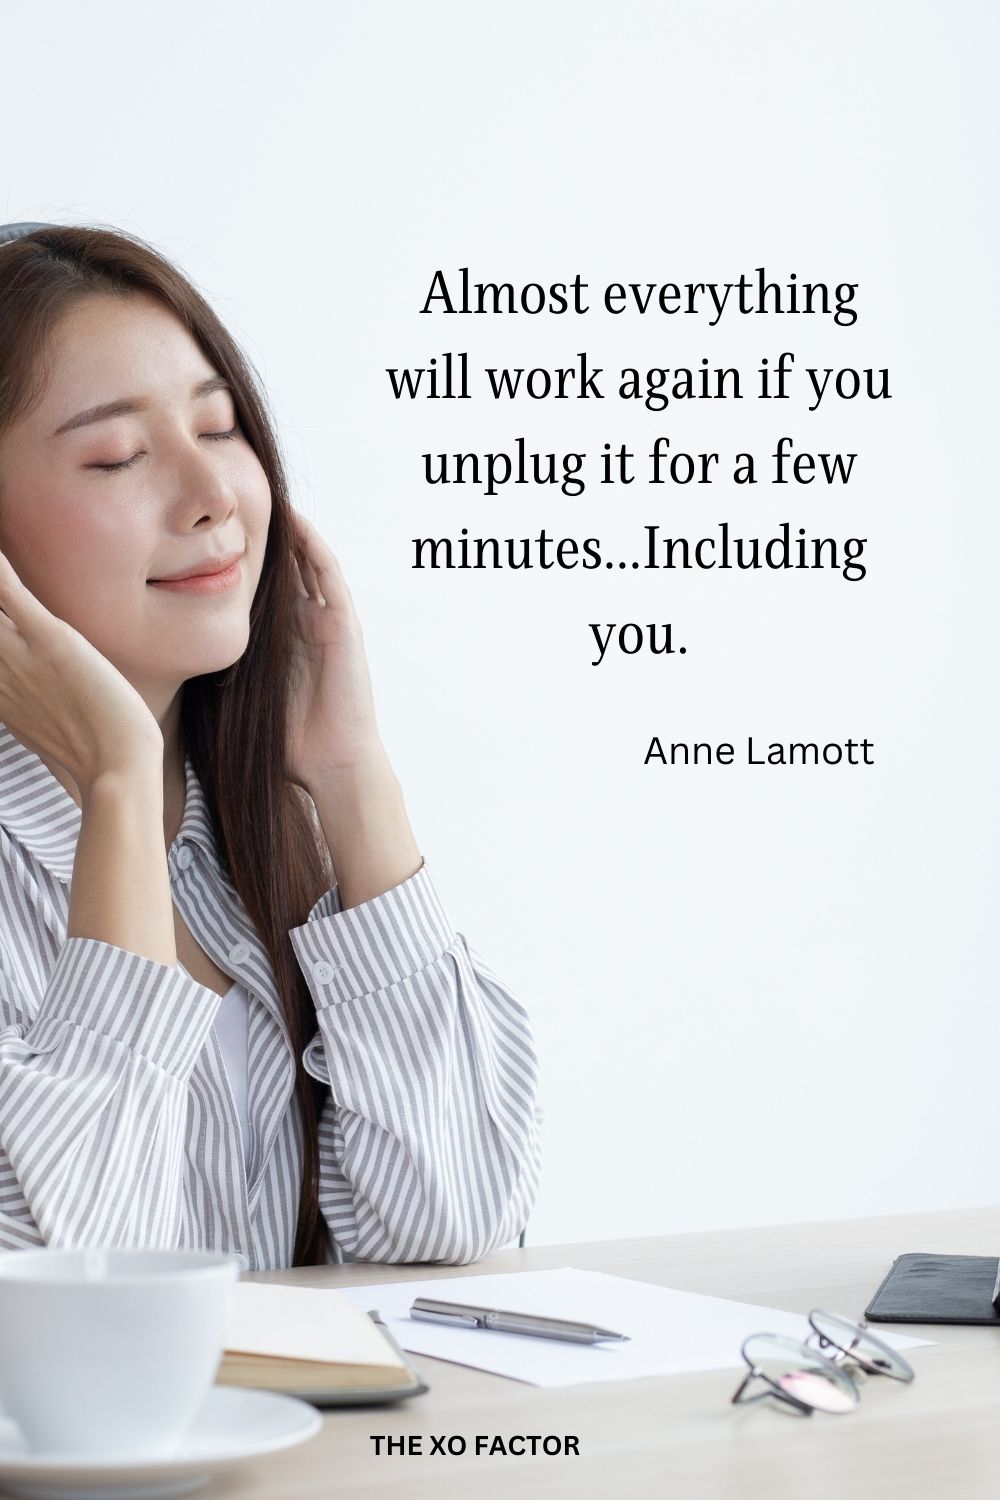 Almost everything will work again if you unplug it for a few minutes…Including you.
Anne Lamott